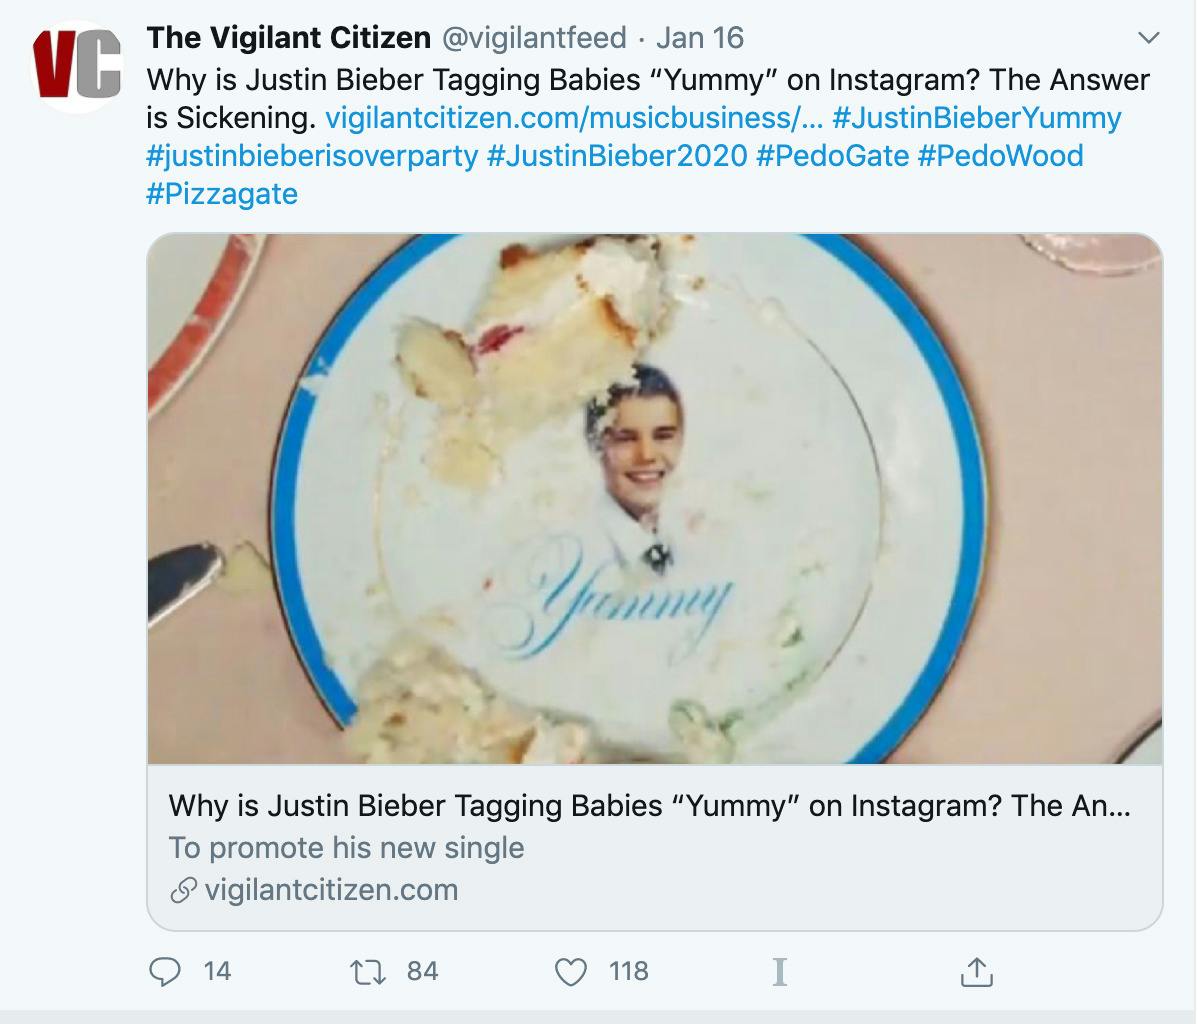 justin bieber pizzagate plate of cake from yummy video